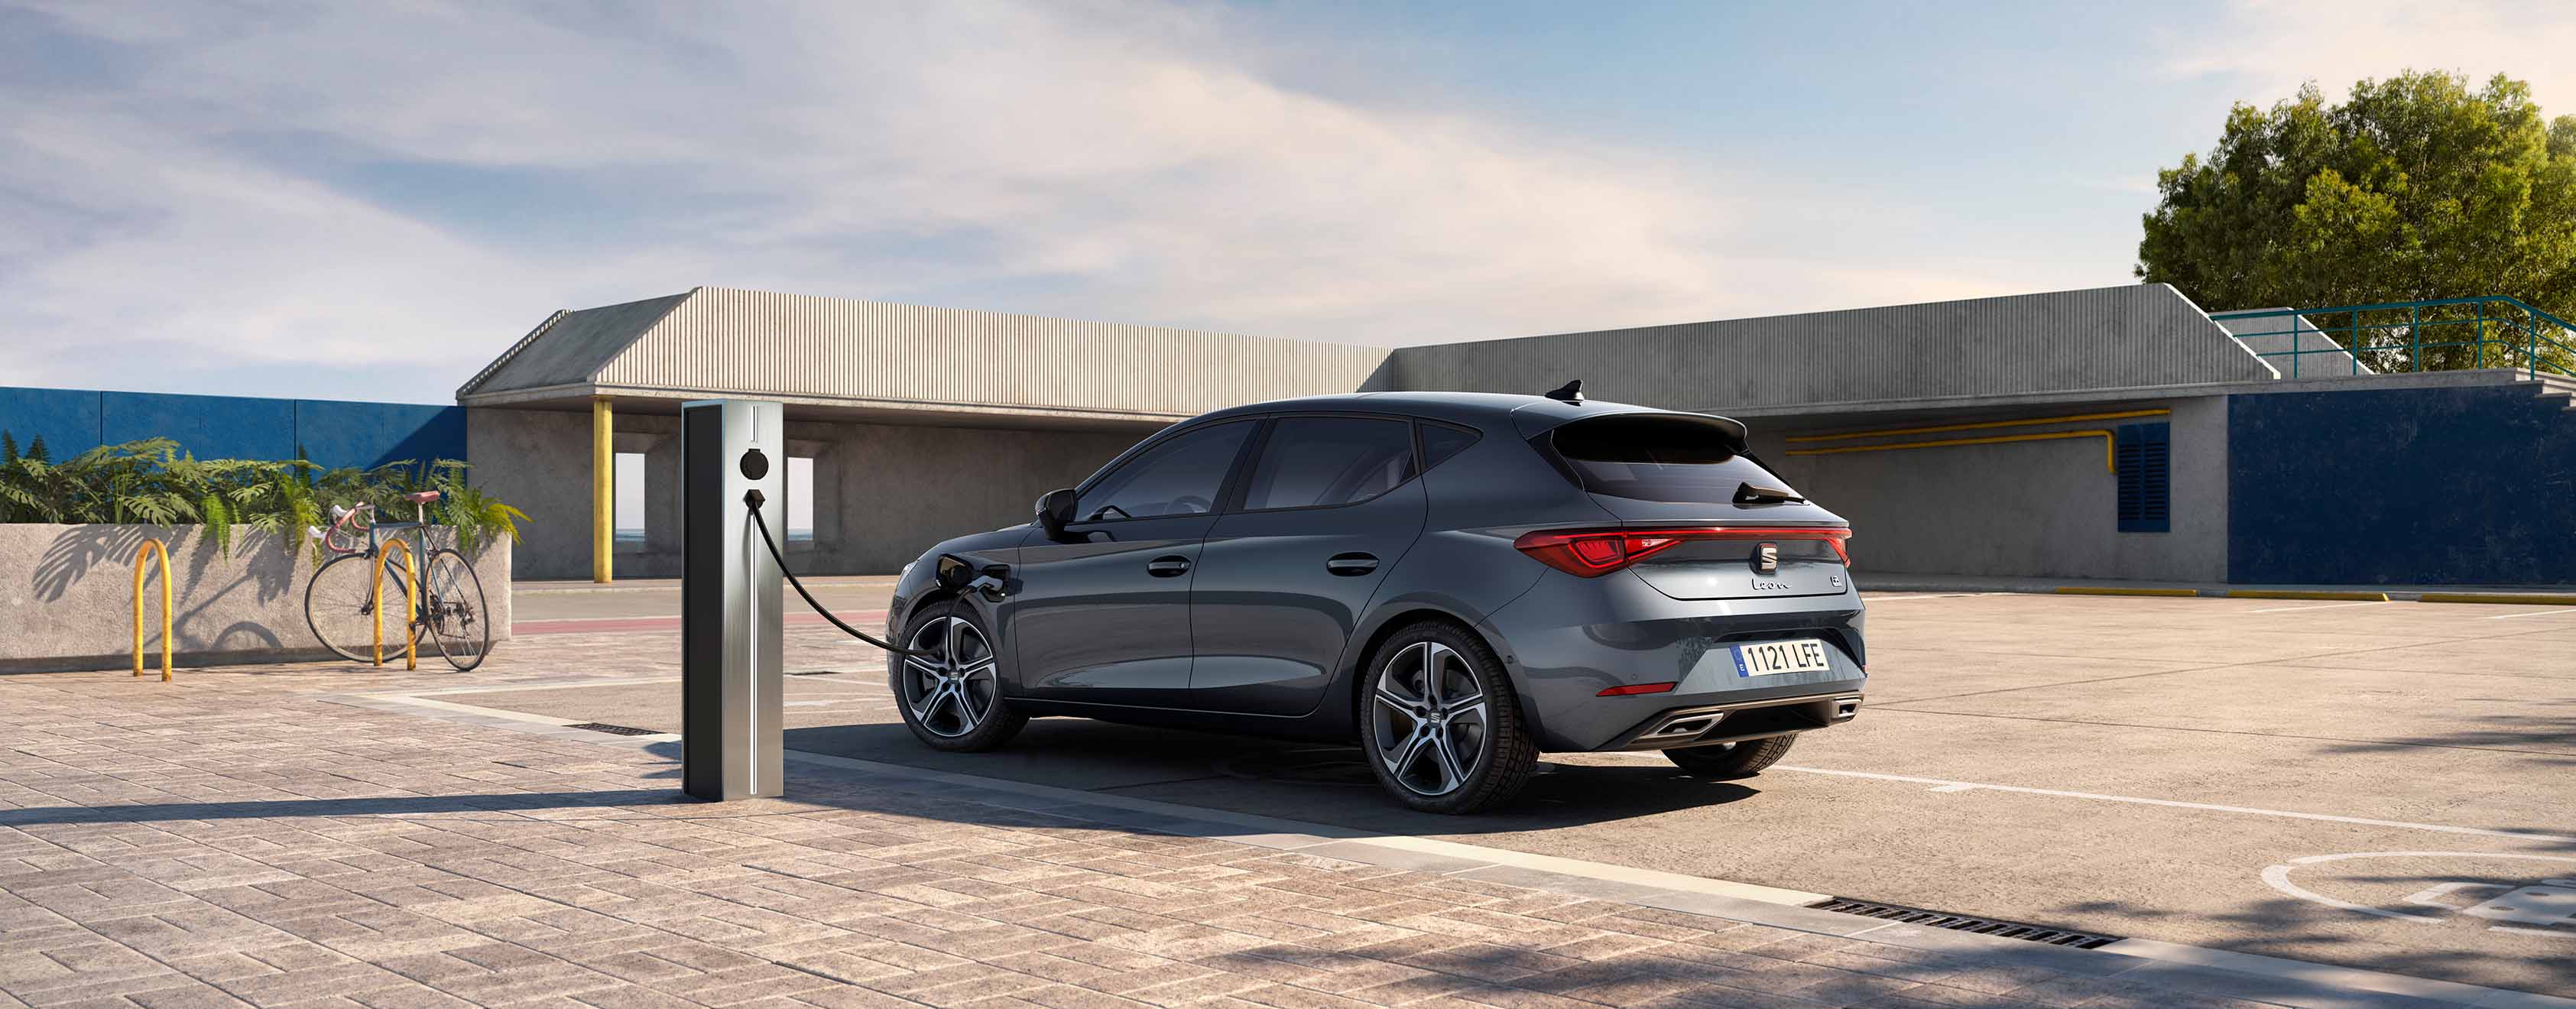 seat leon sportstourer phev with 1600 litre boot capacity 